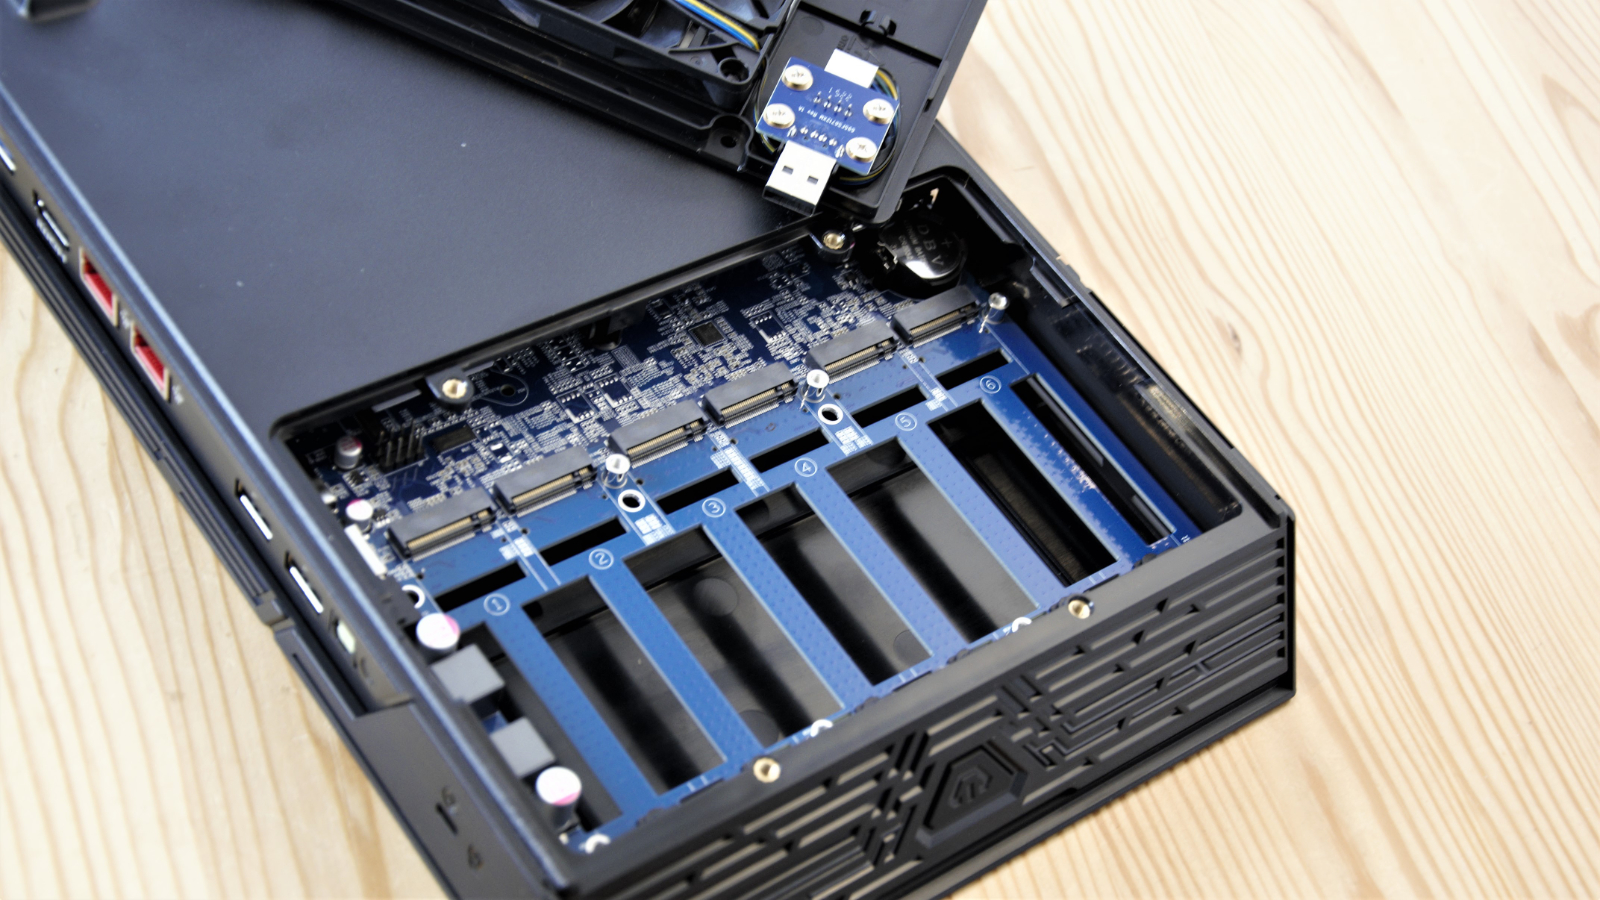 Asustor Flashstor 6 FS6706T review: A NAS for NVMe Drives - Tech